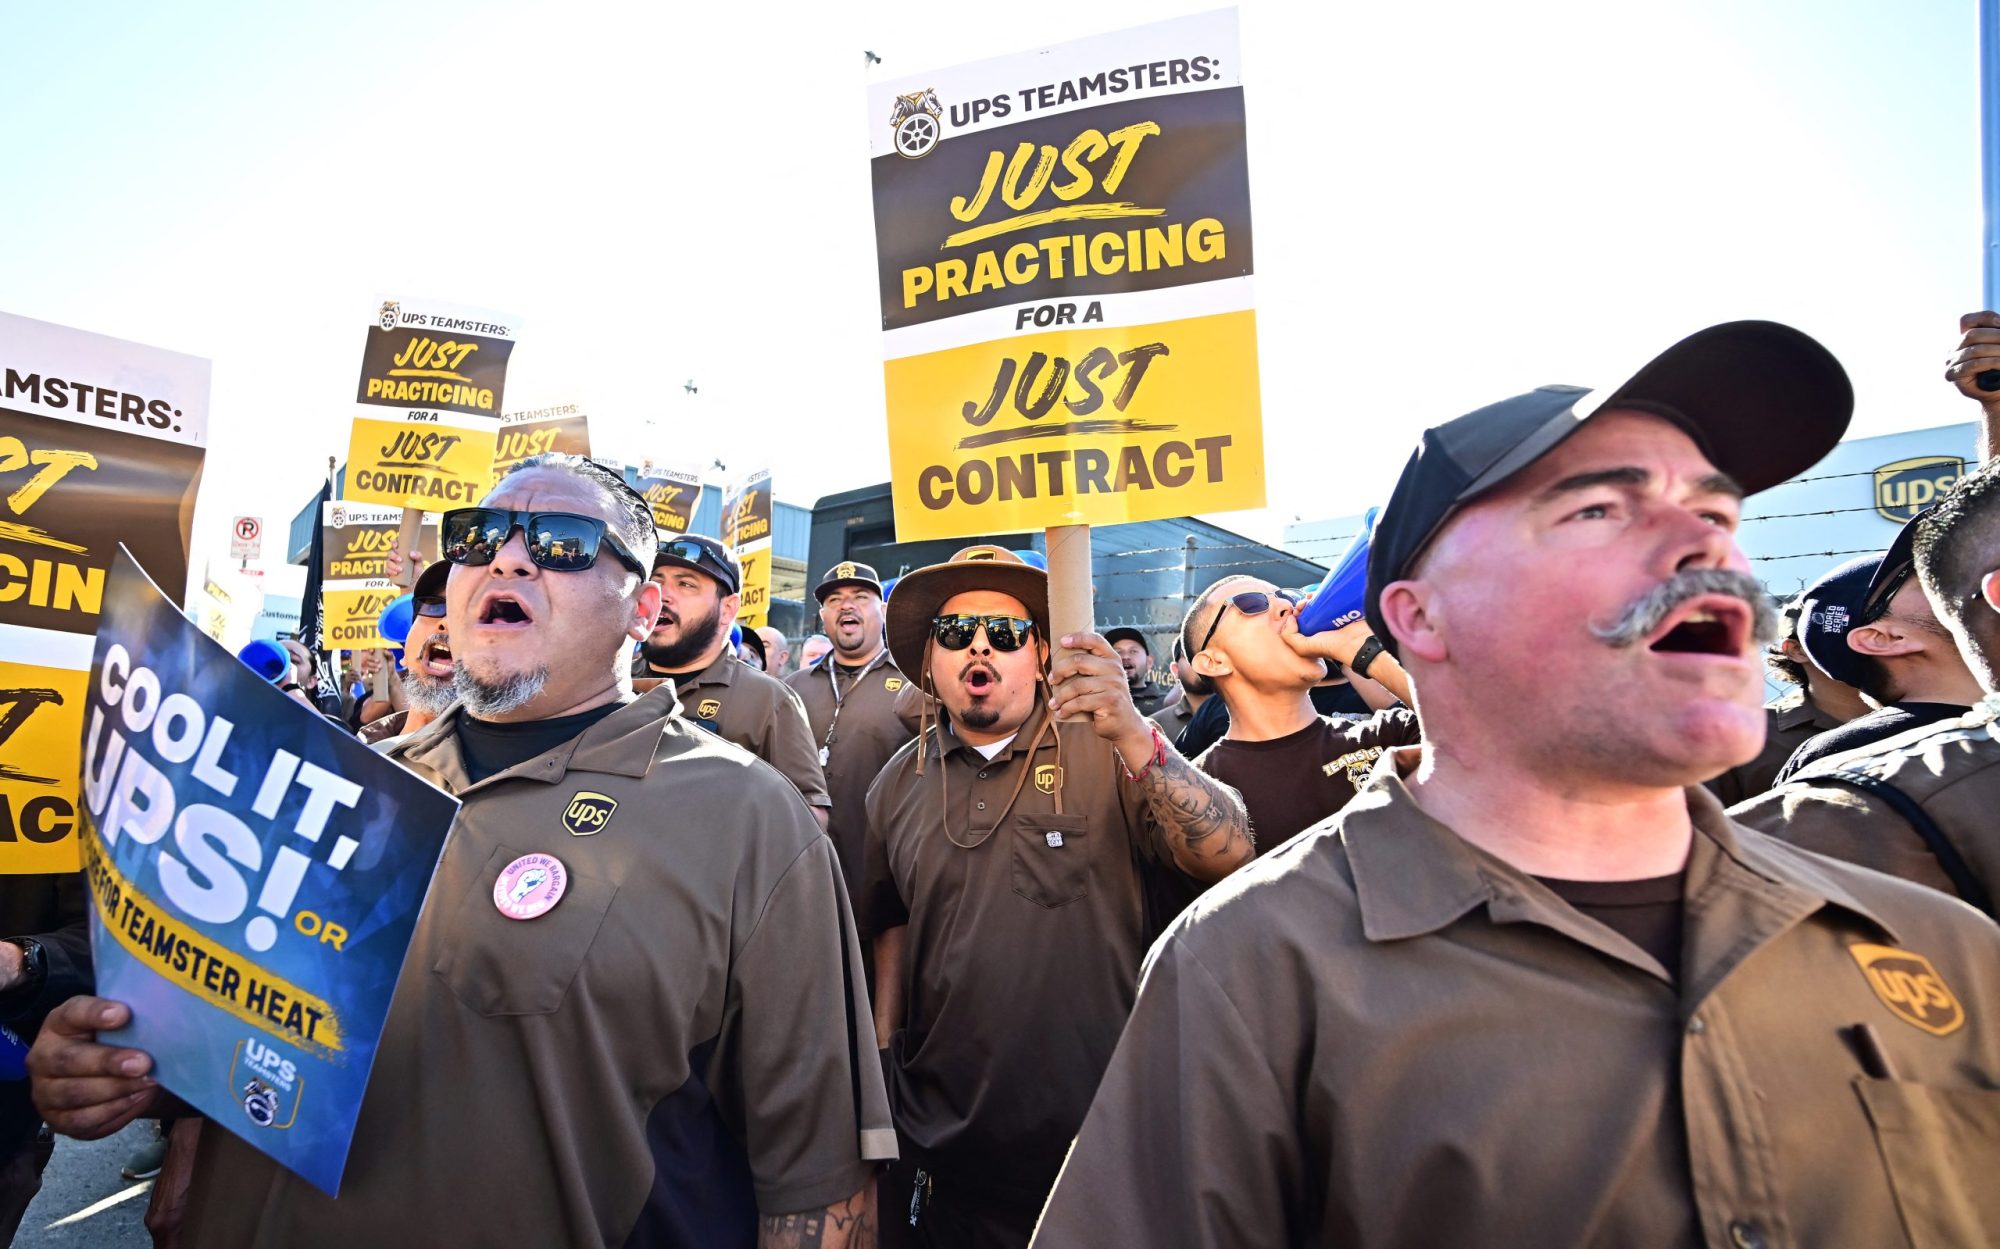 UPS workers in their uniforms carrying practice picket signs on a sunny day